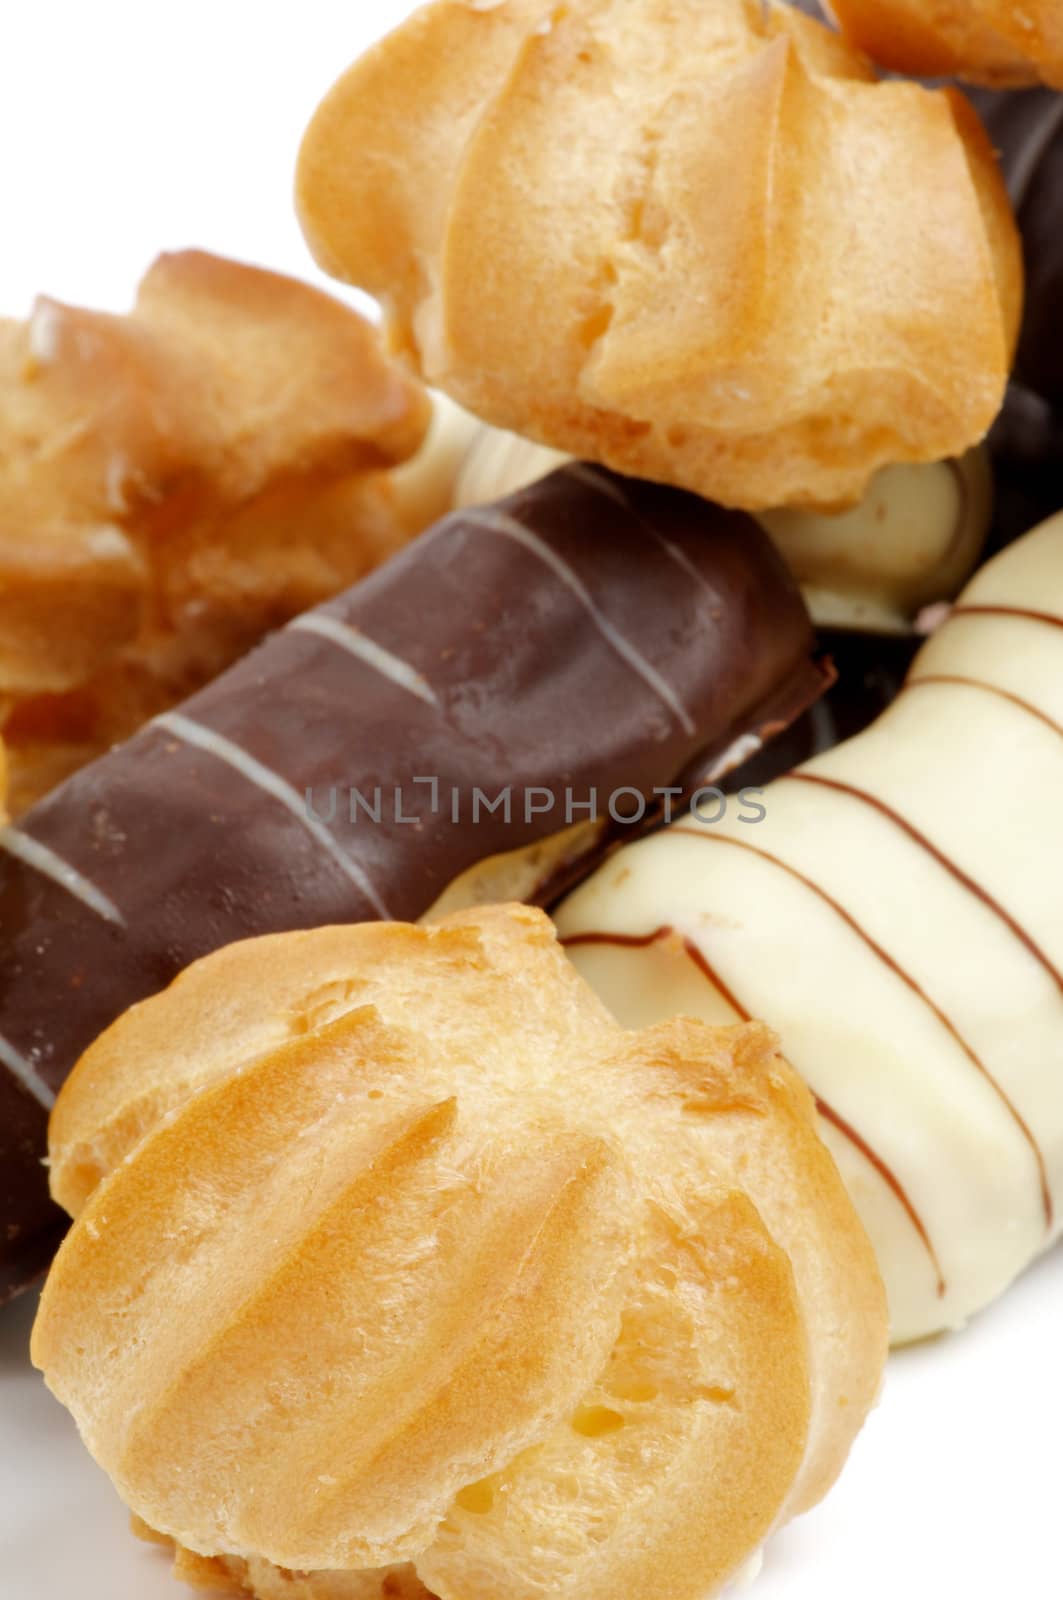 Arrangement of Eclair with Dark and White Chocolate Glaze and Profiterole closeup on white background